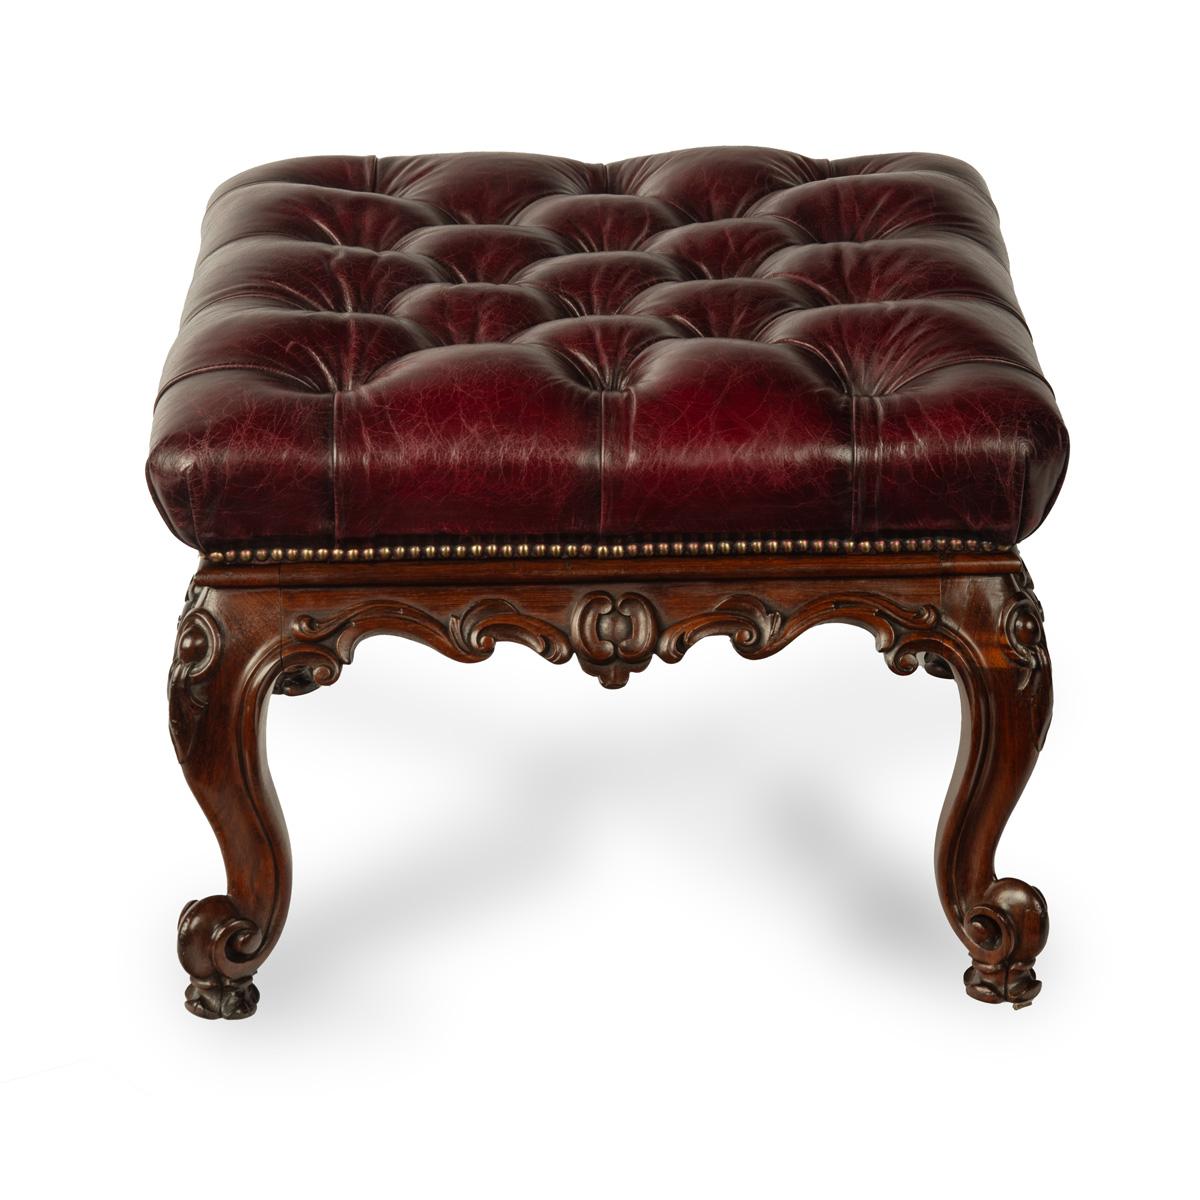 An early Victorian leather-upholstered rosewood stool, of square form, the drop-on top re-upholstered in deep buttoned burgundy leather, raised on bold cabriole legs, the seat rail and feet carved with scrolls and oval bosses.  English, circa 1850.

